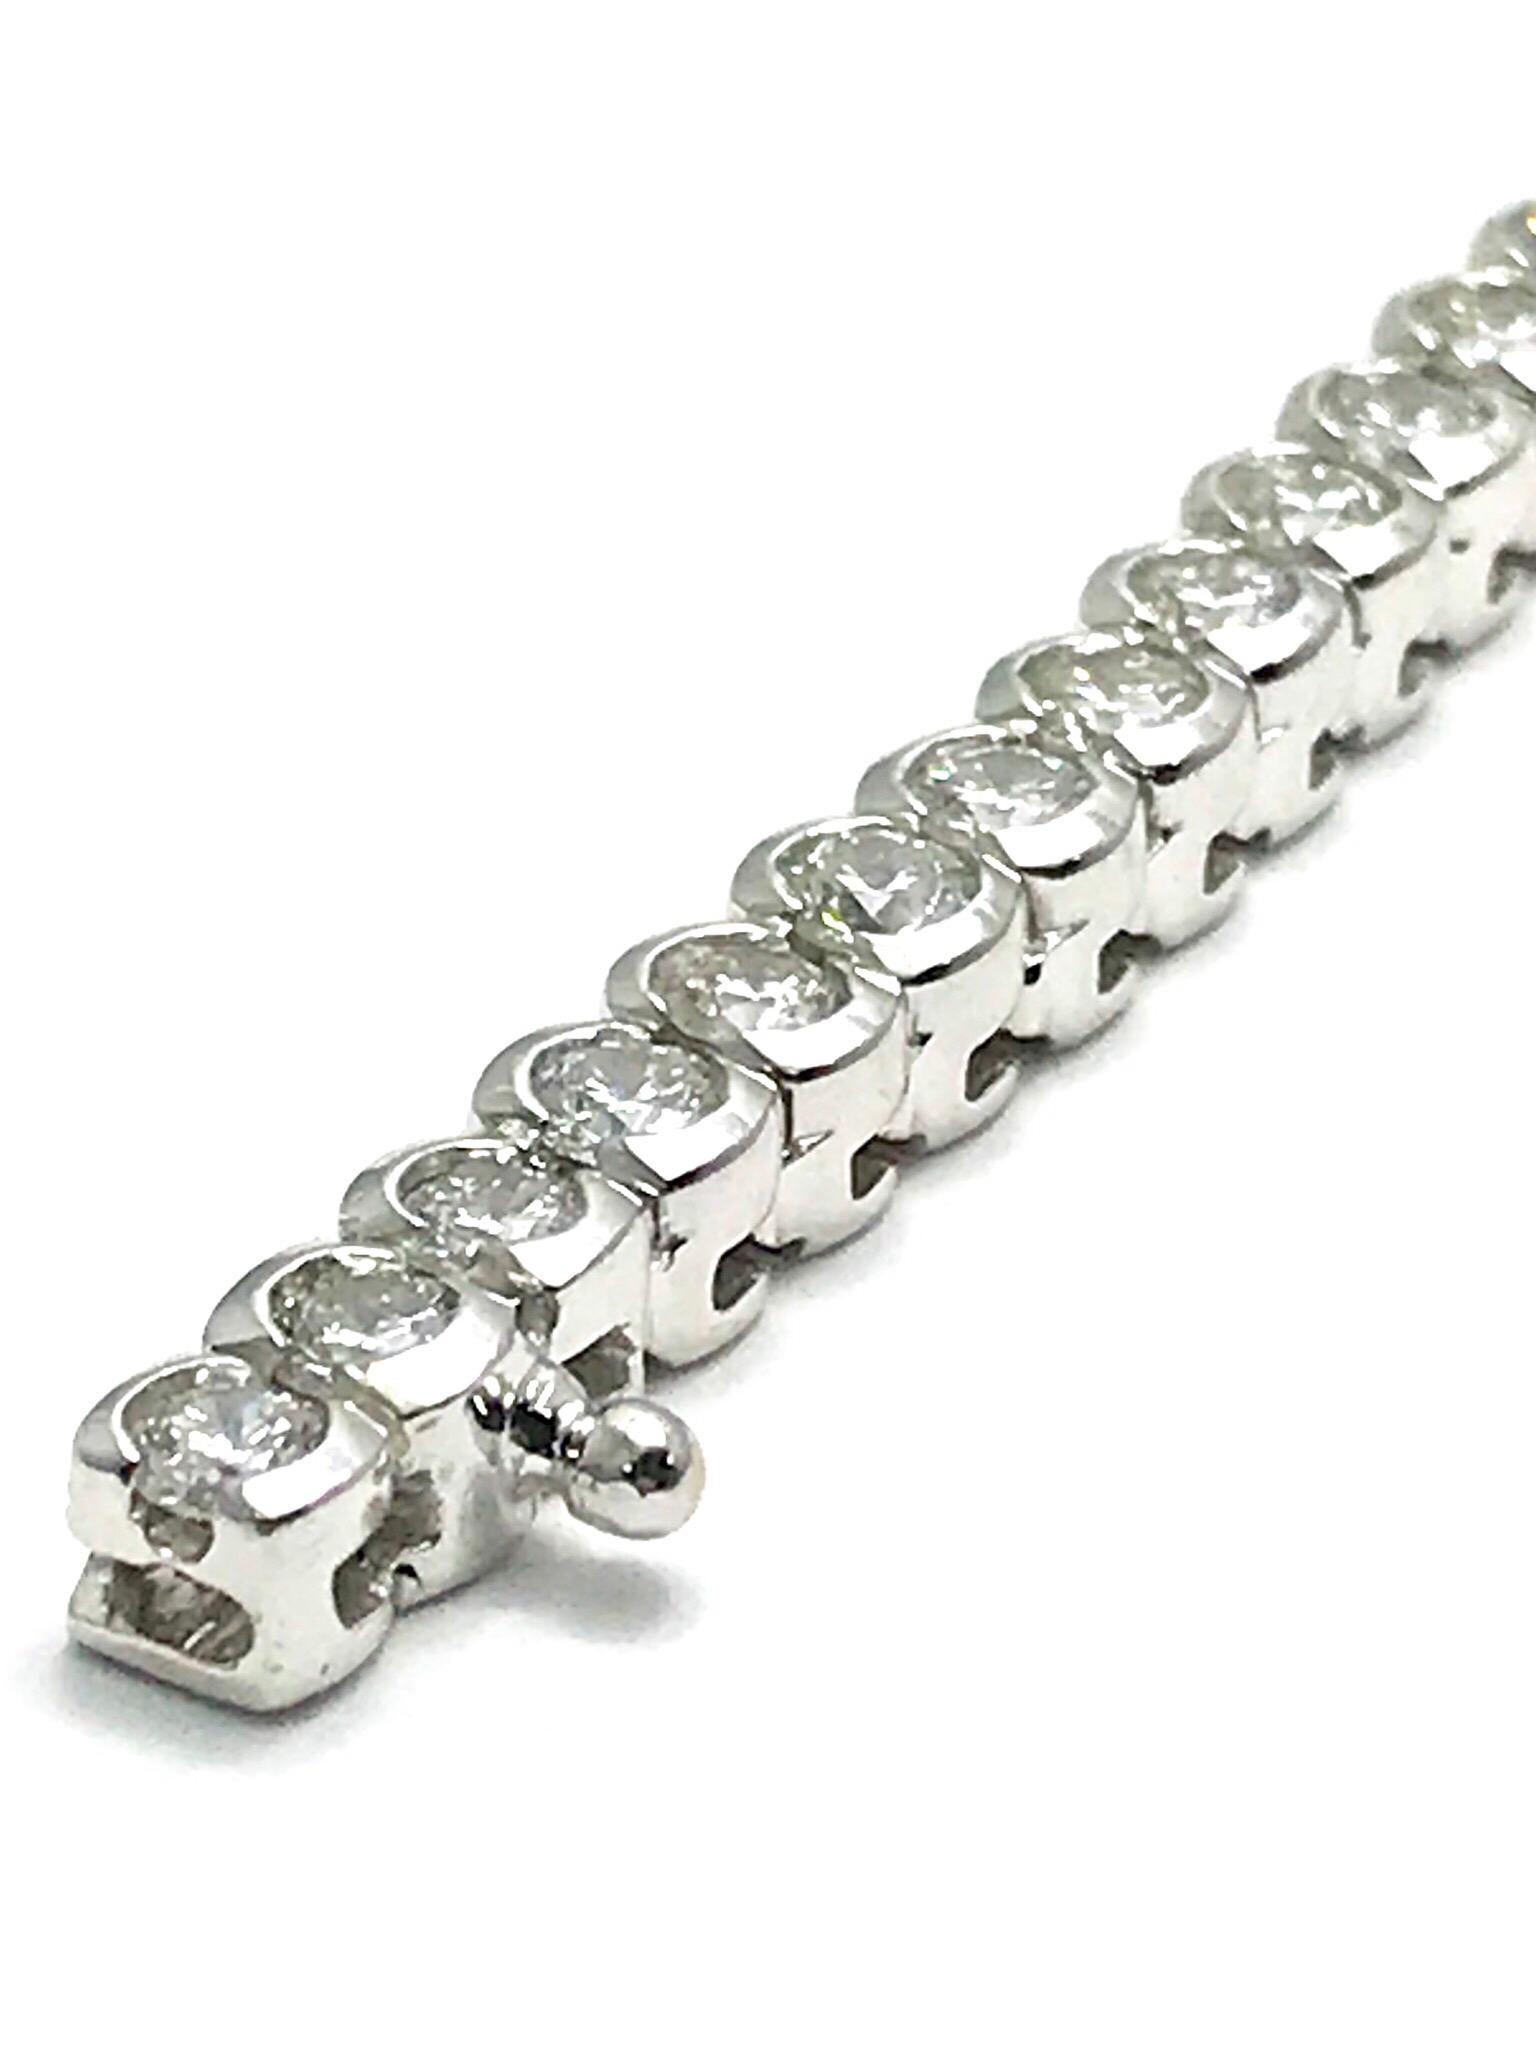 This is a stunning 7.50 carat round brilliant Diamond tennis bracelet in 18 karat white gold.  The Diamonds are half bezel set, and graded as F-G color, VS2-SI1 clarity.  The bracelet has a simple push button clasp with a safety.  It is 7.00 inches